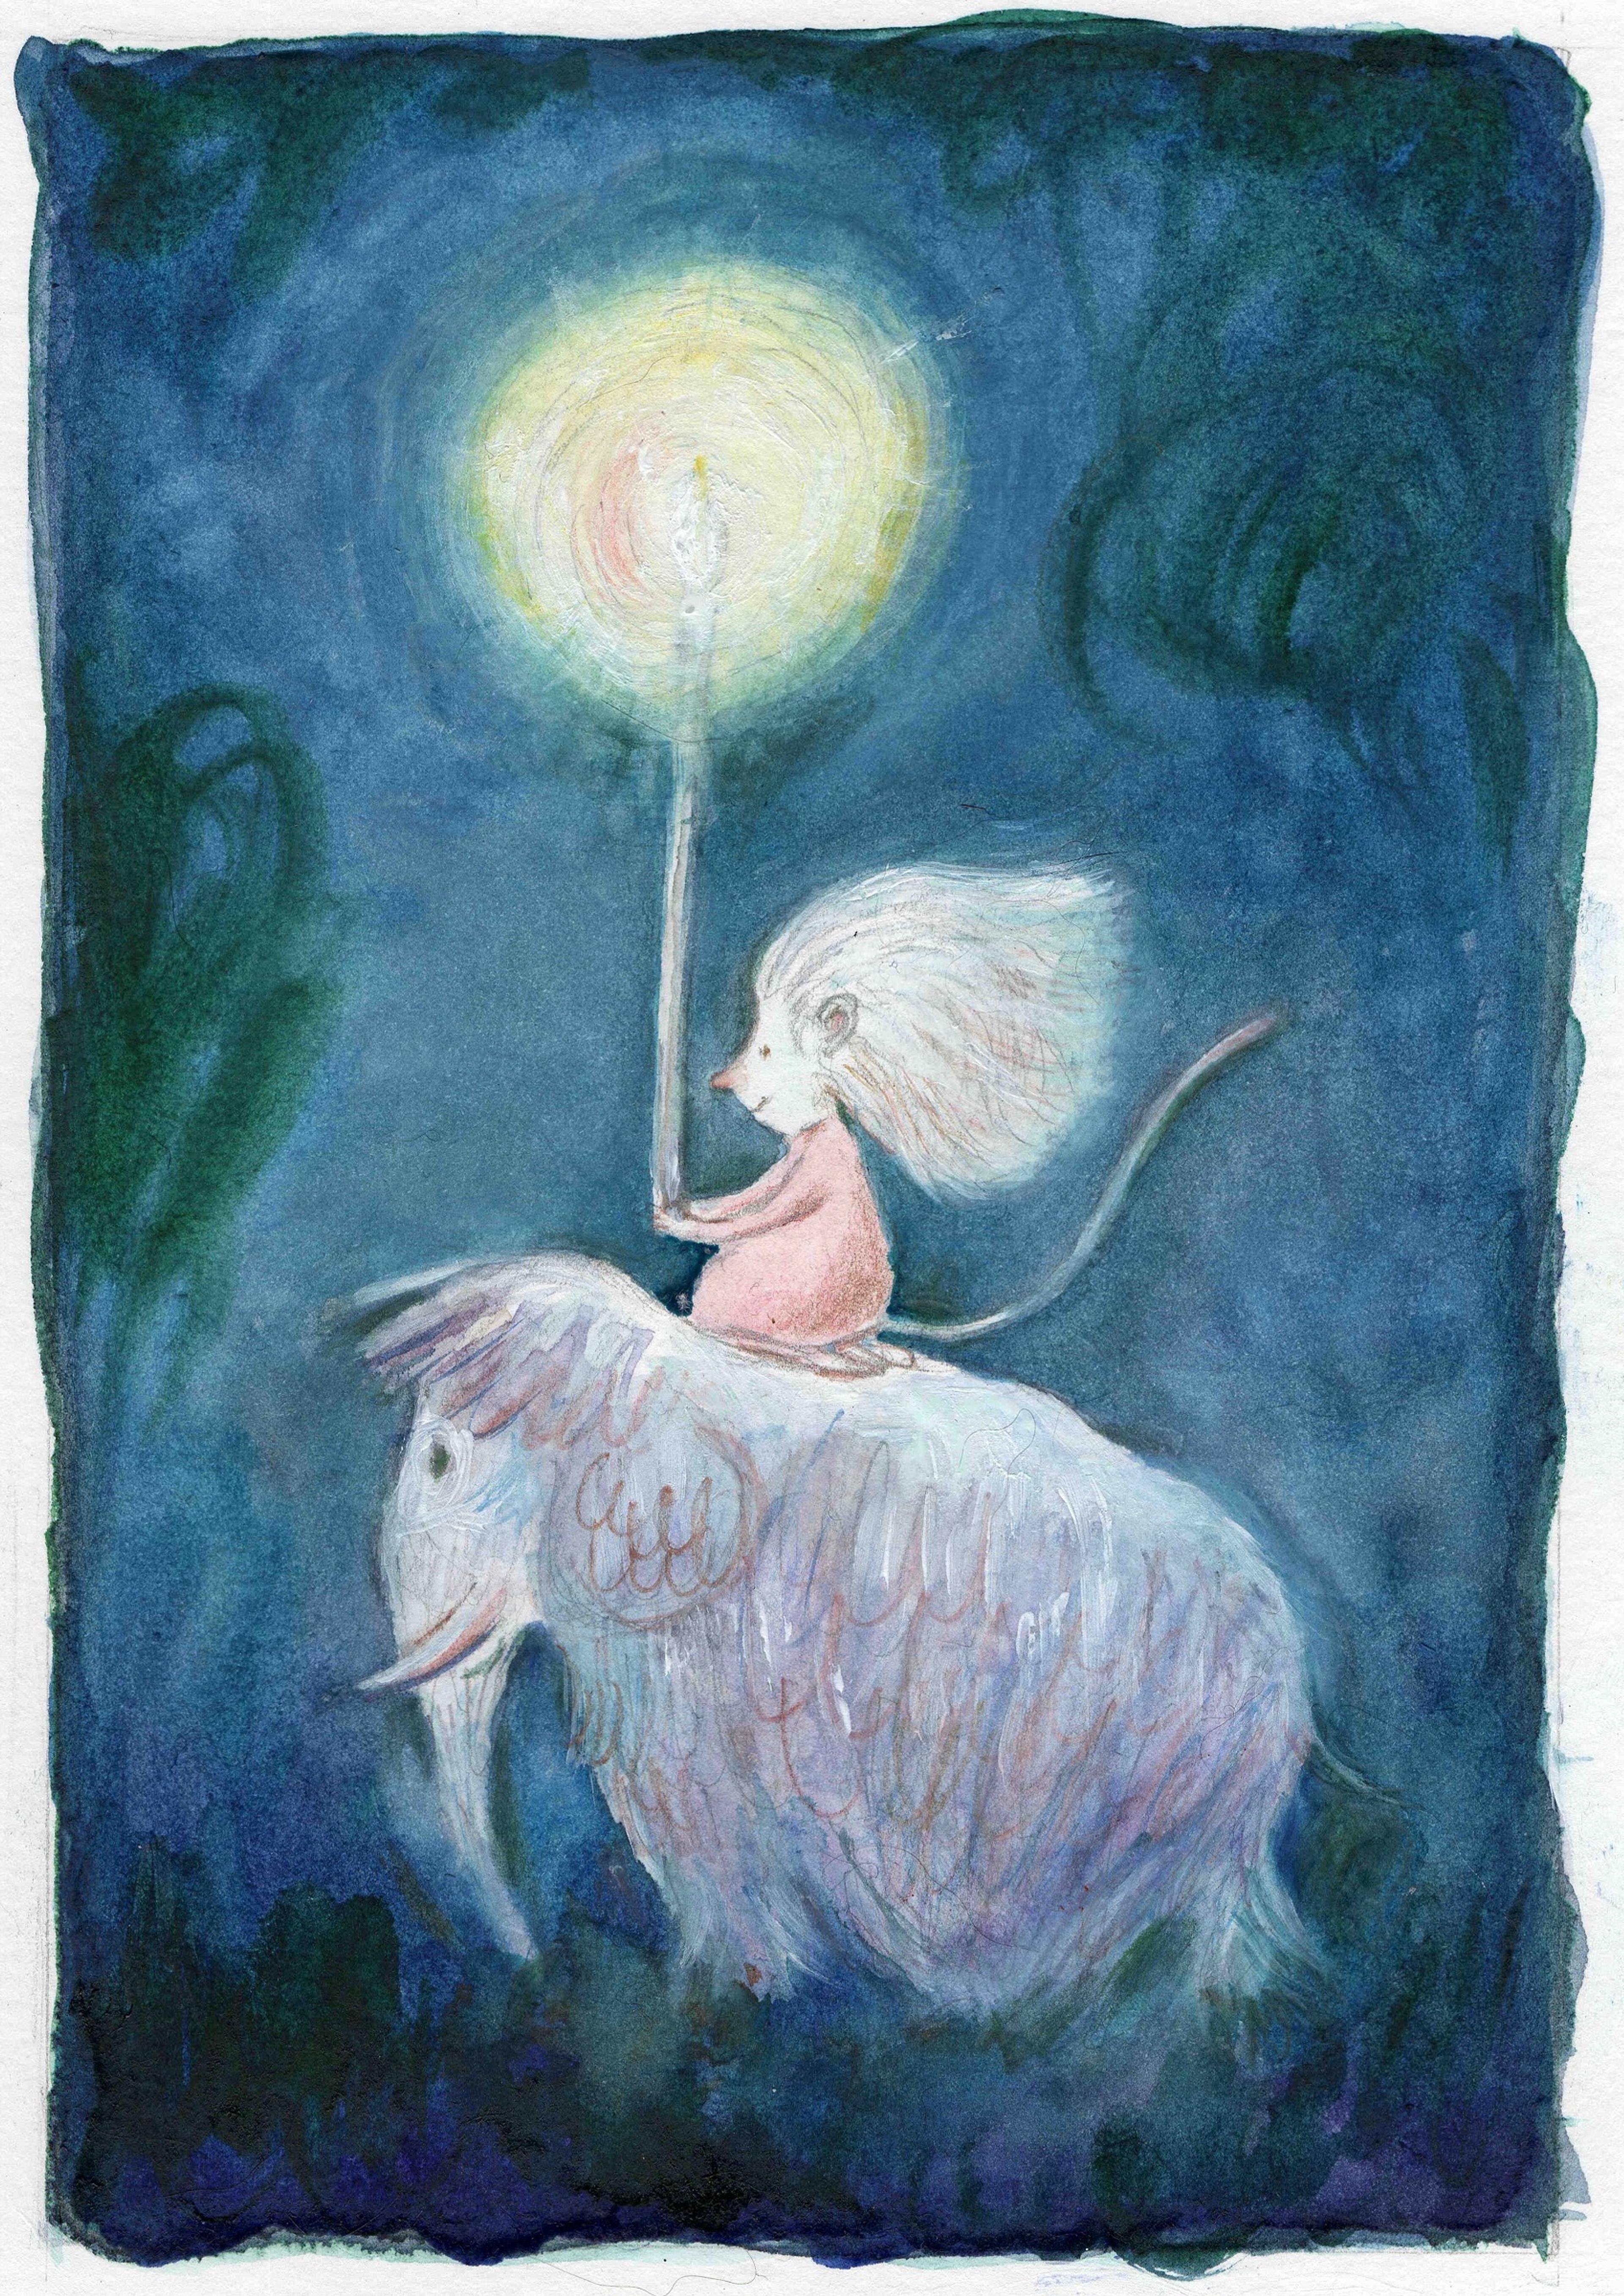 Illustration of a mouse carrying a candle and riding a woolly mammoth